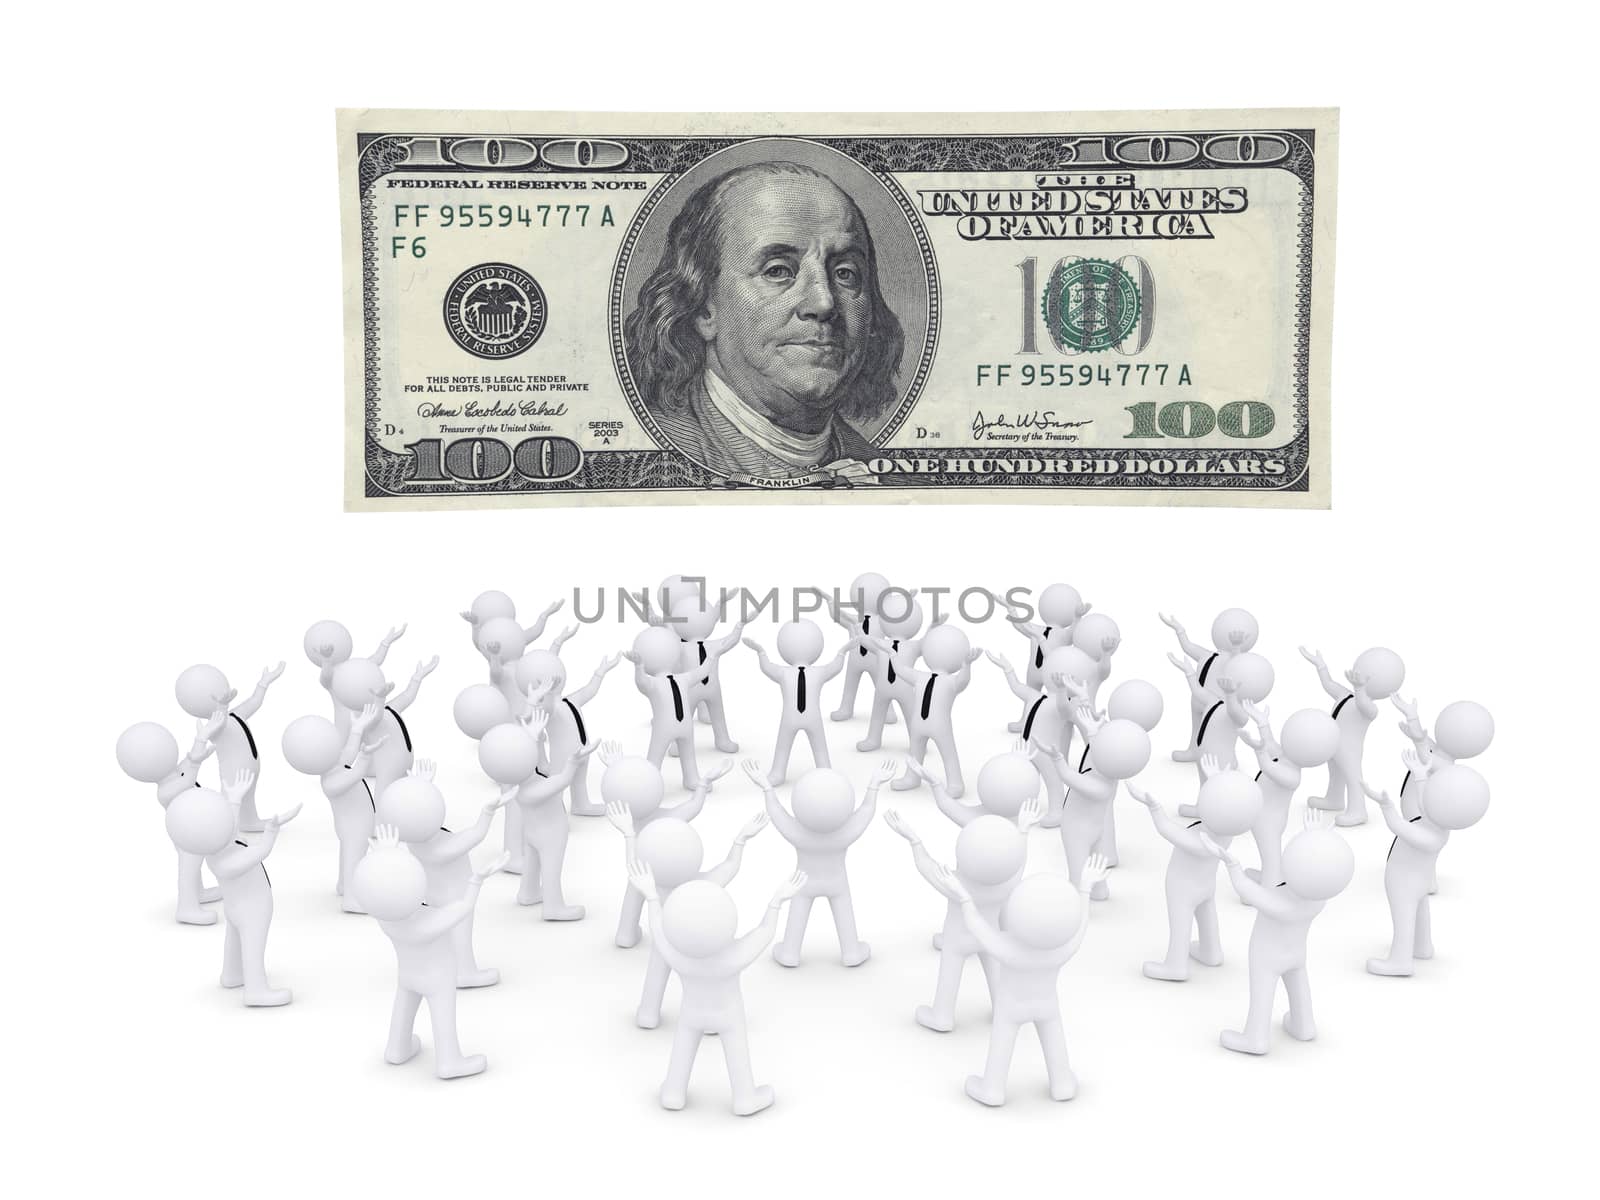 Group of white people worshiping dollar banknote. 3d render isolated on white background